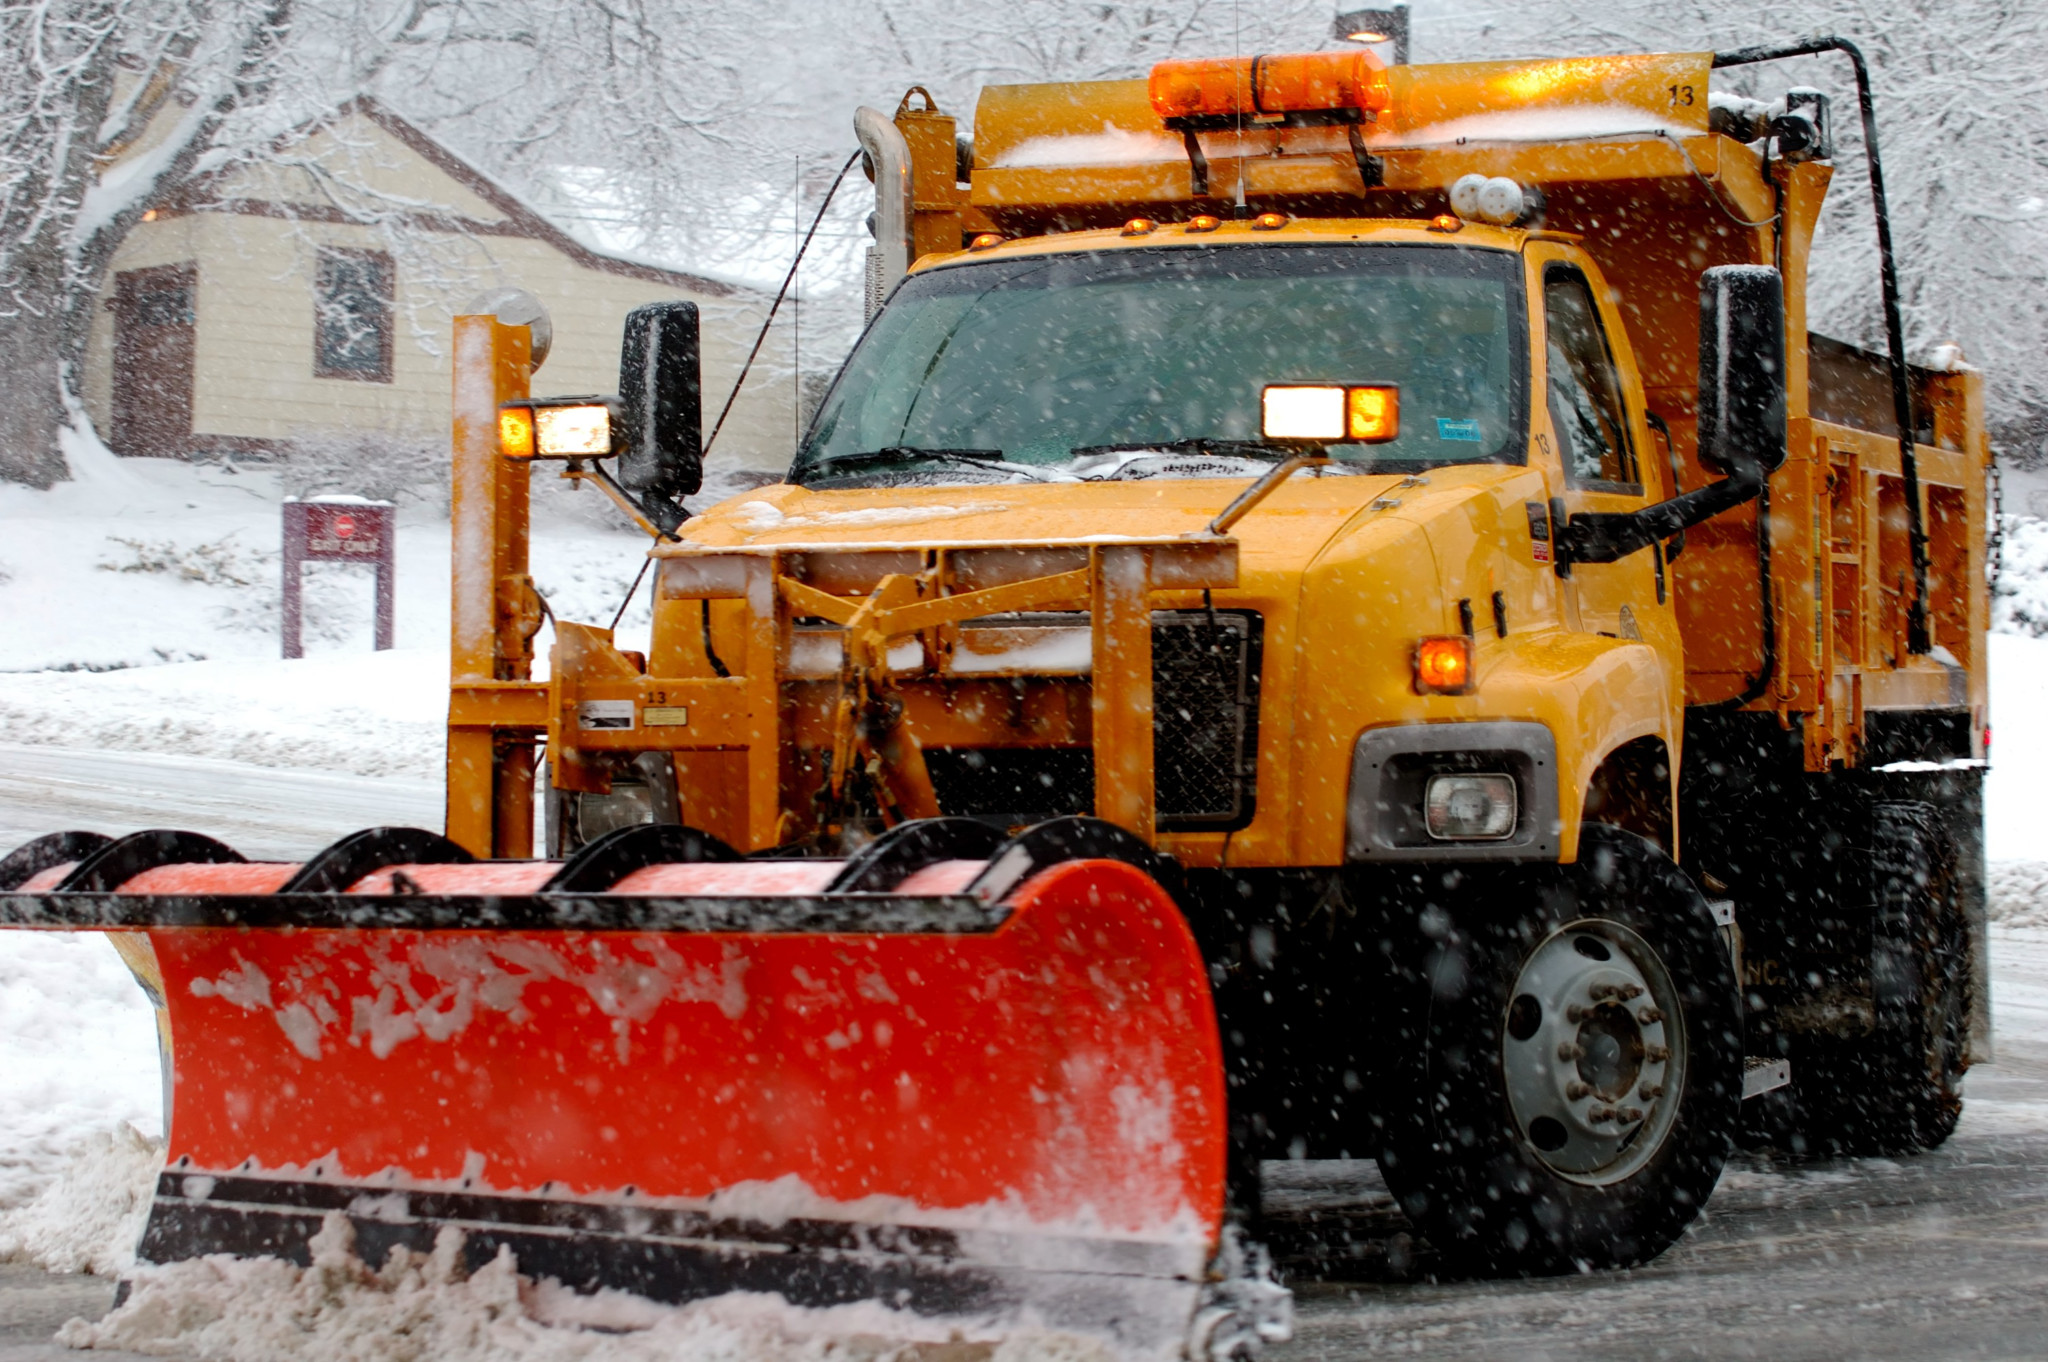 Liability Insurance for Snowplow Operations